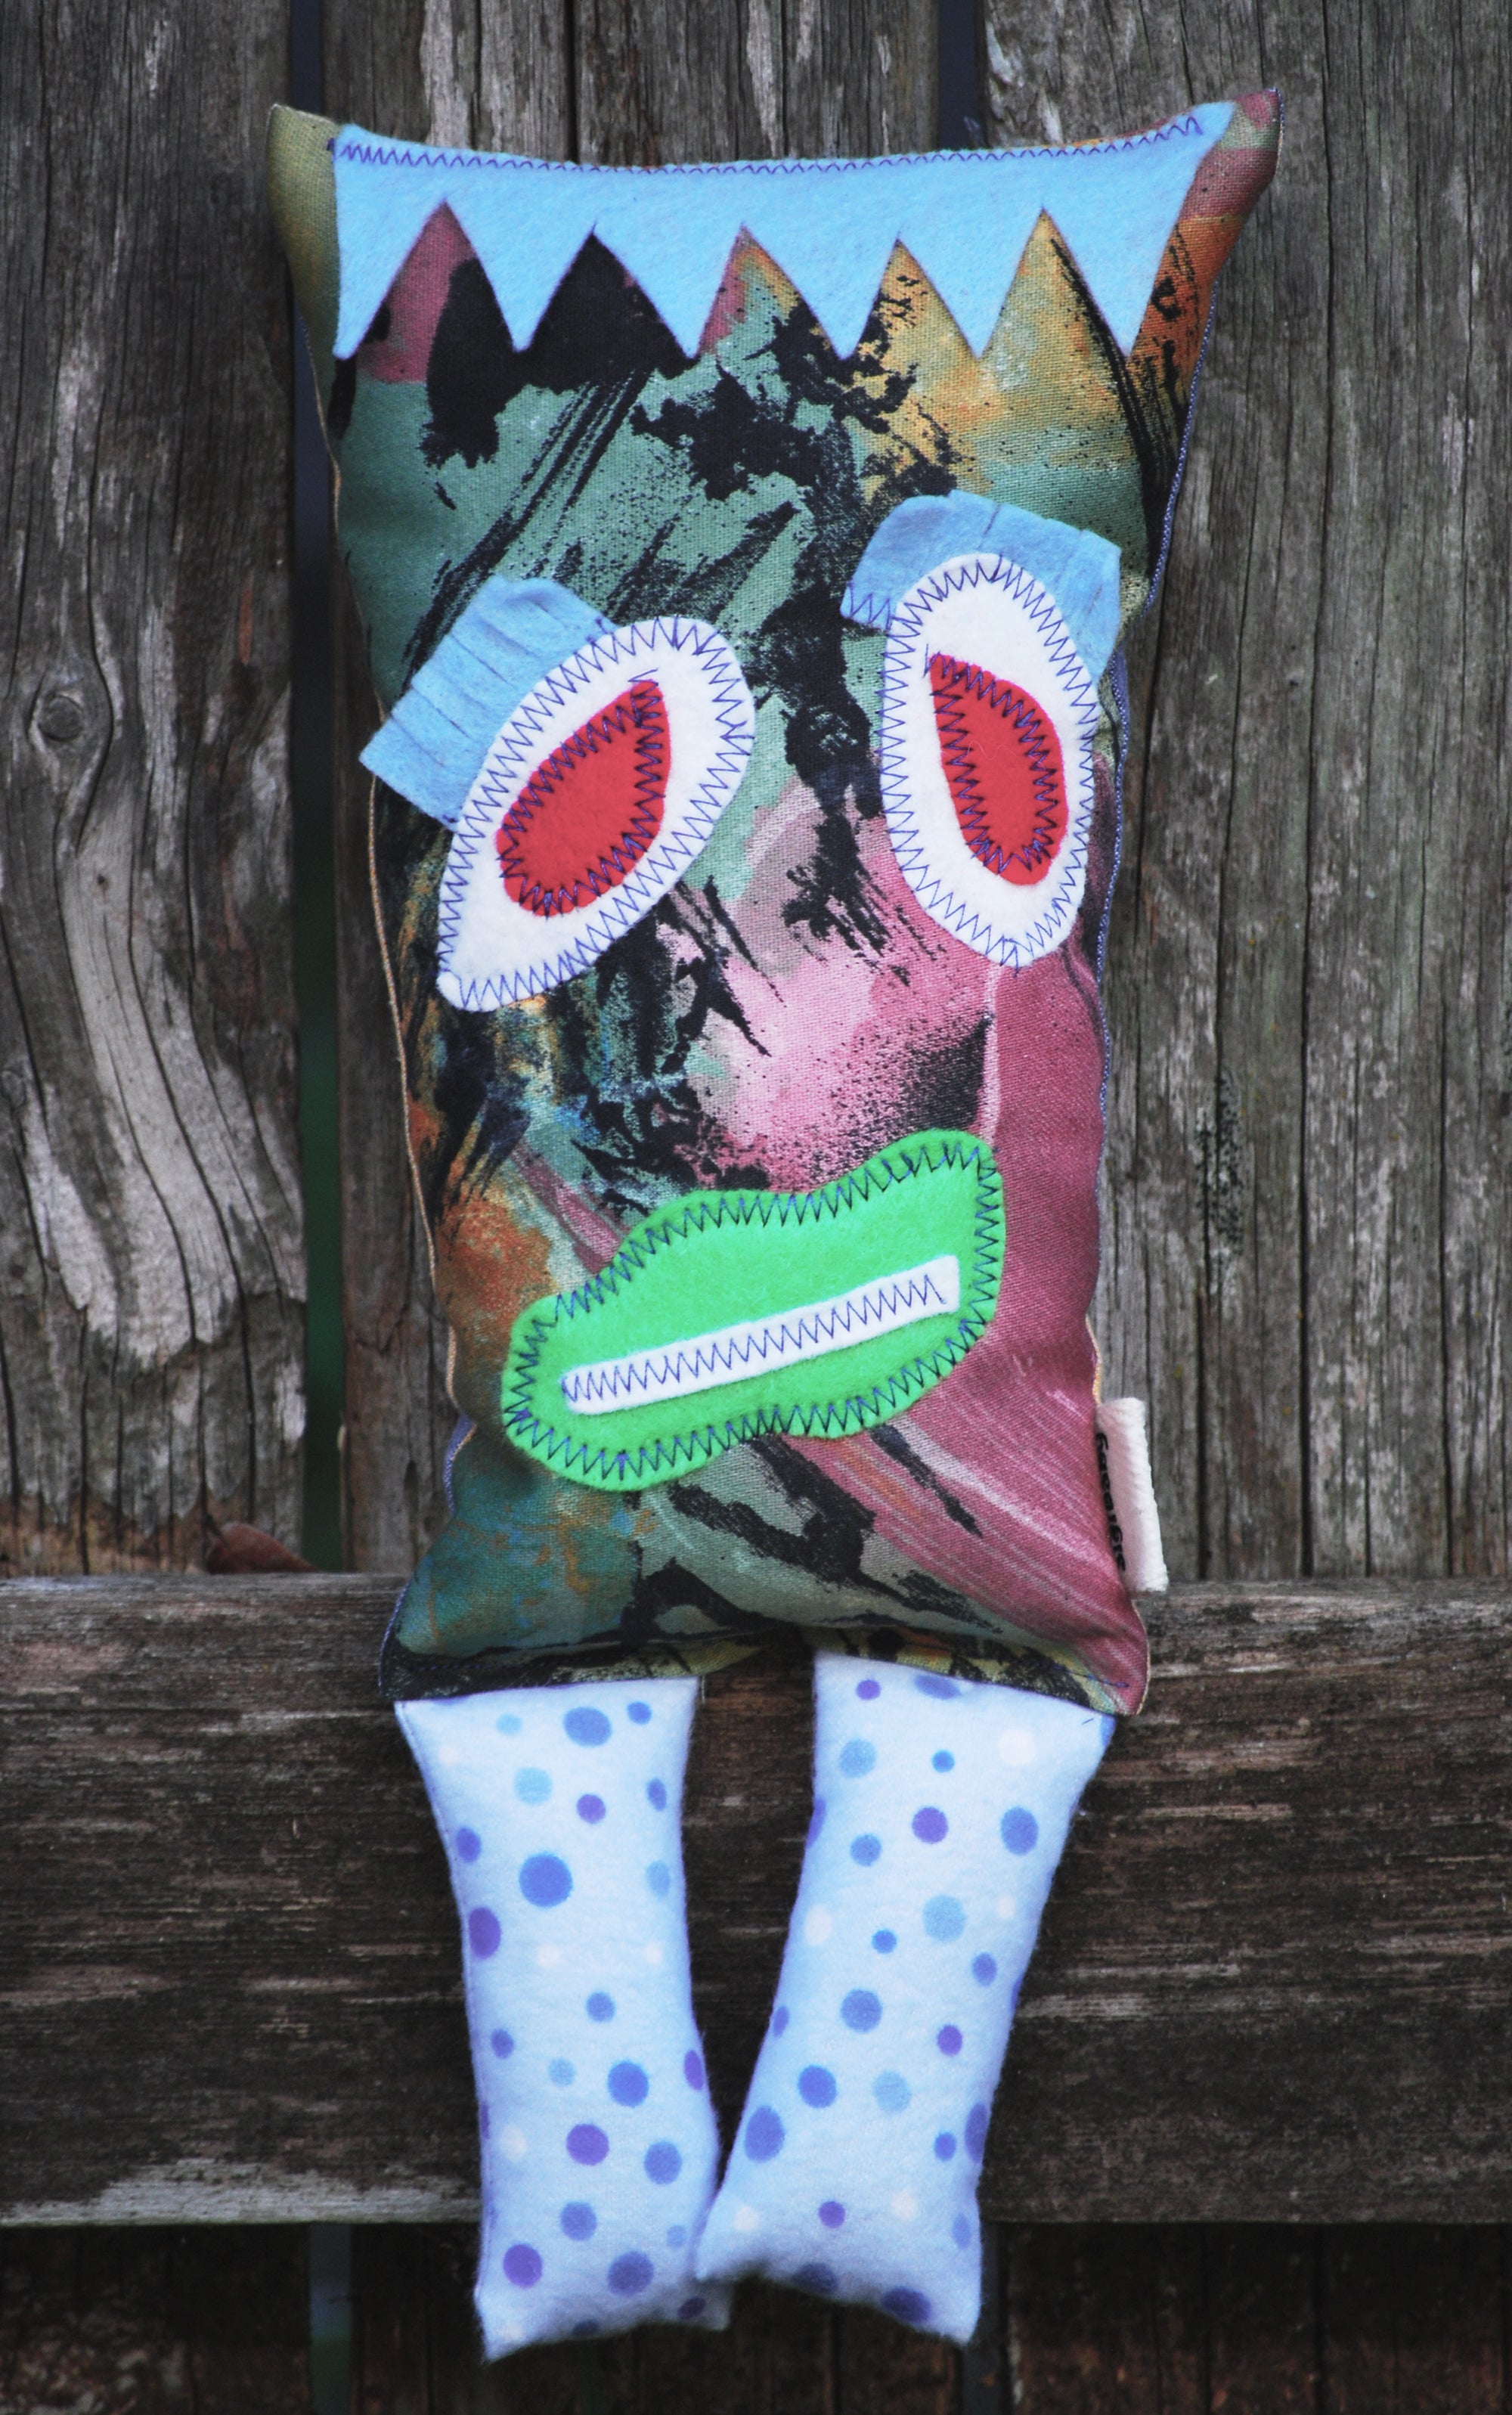 Little Monster "Friedrich" Handmade Recycled Fabric Plush Toy Doll